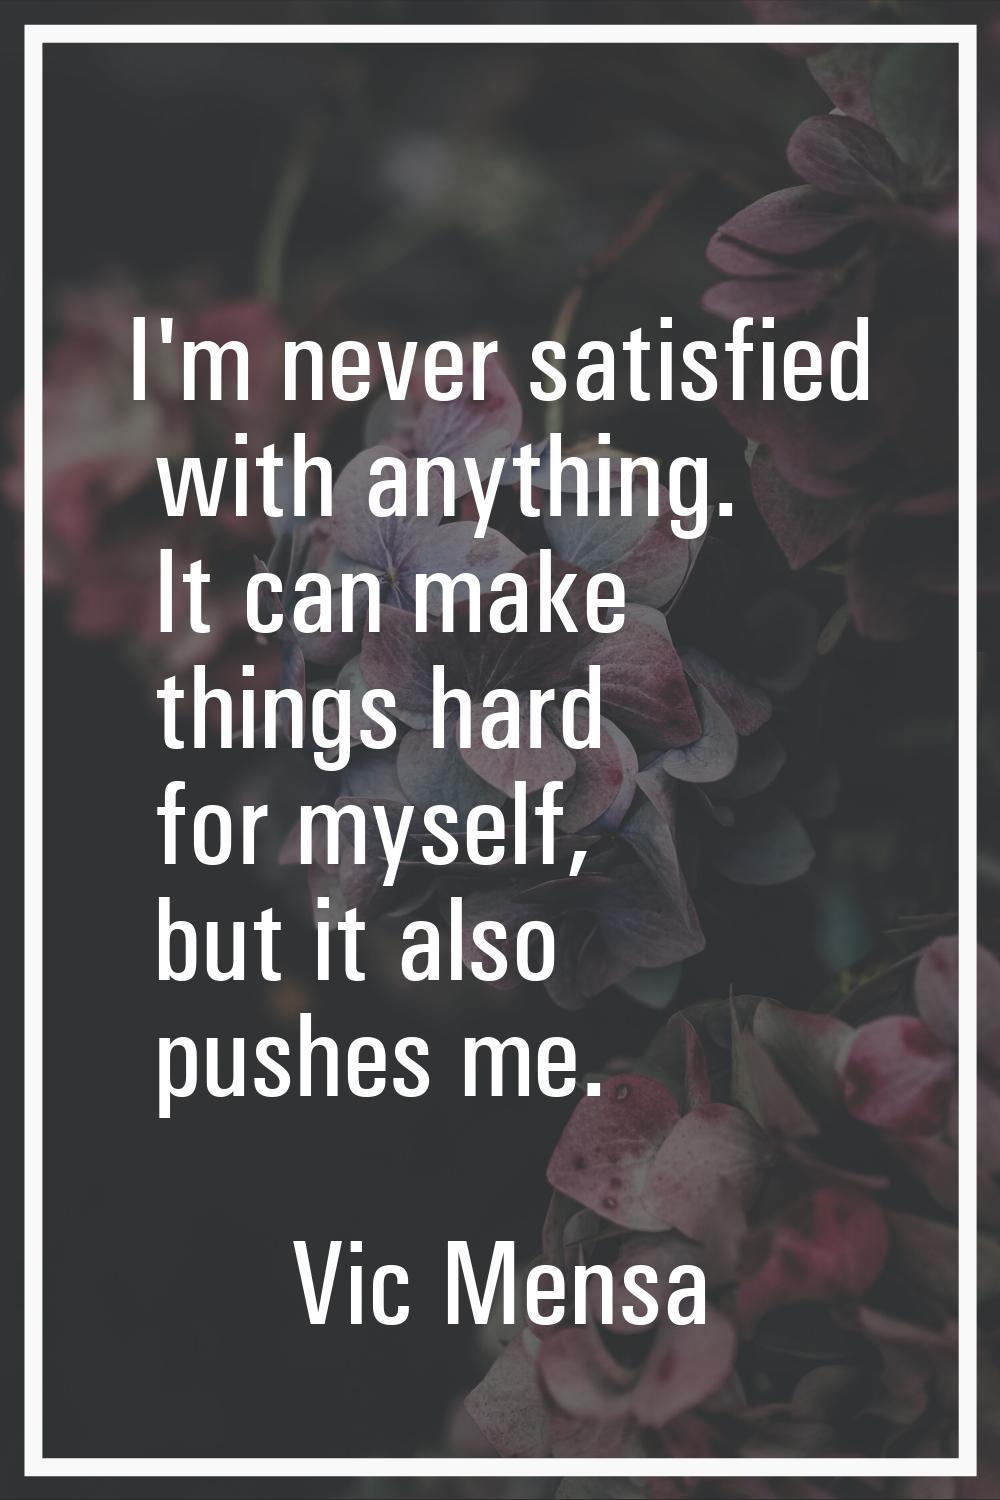 I'm never satisfied with anything. It can make things hard for myself, but it also pushes me.